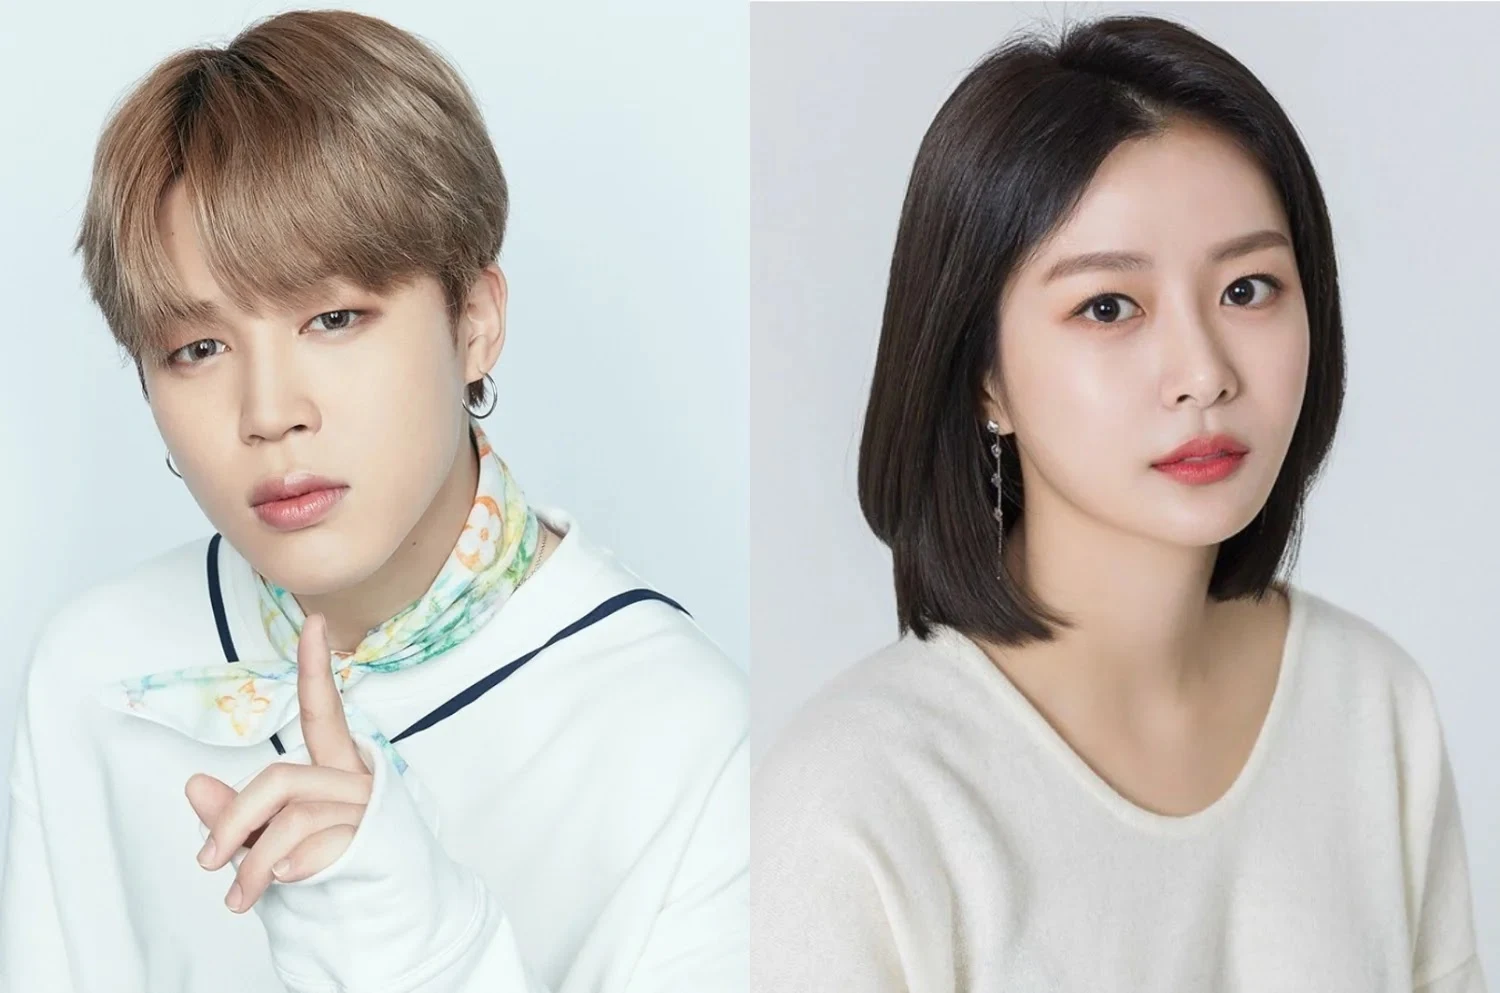 Actress Song Da-eun issued a warning to BTS fans after recent speculations surrounding a romantic relationship with Jimin.